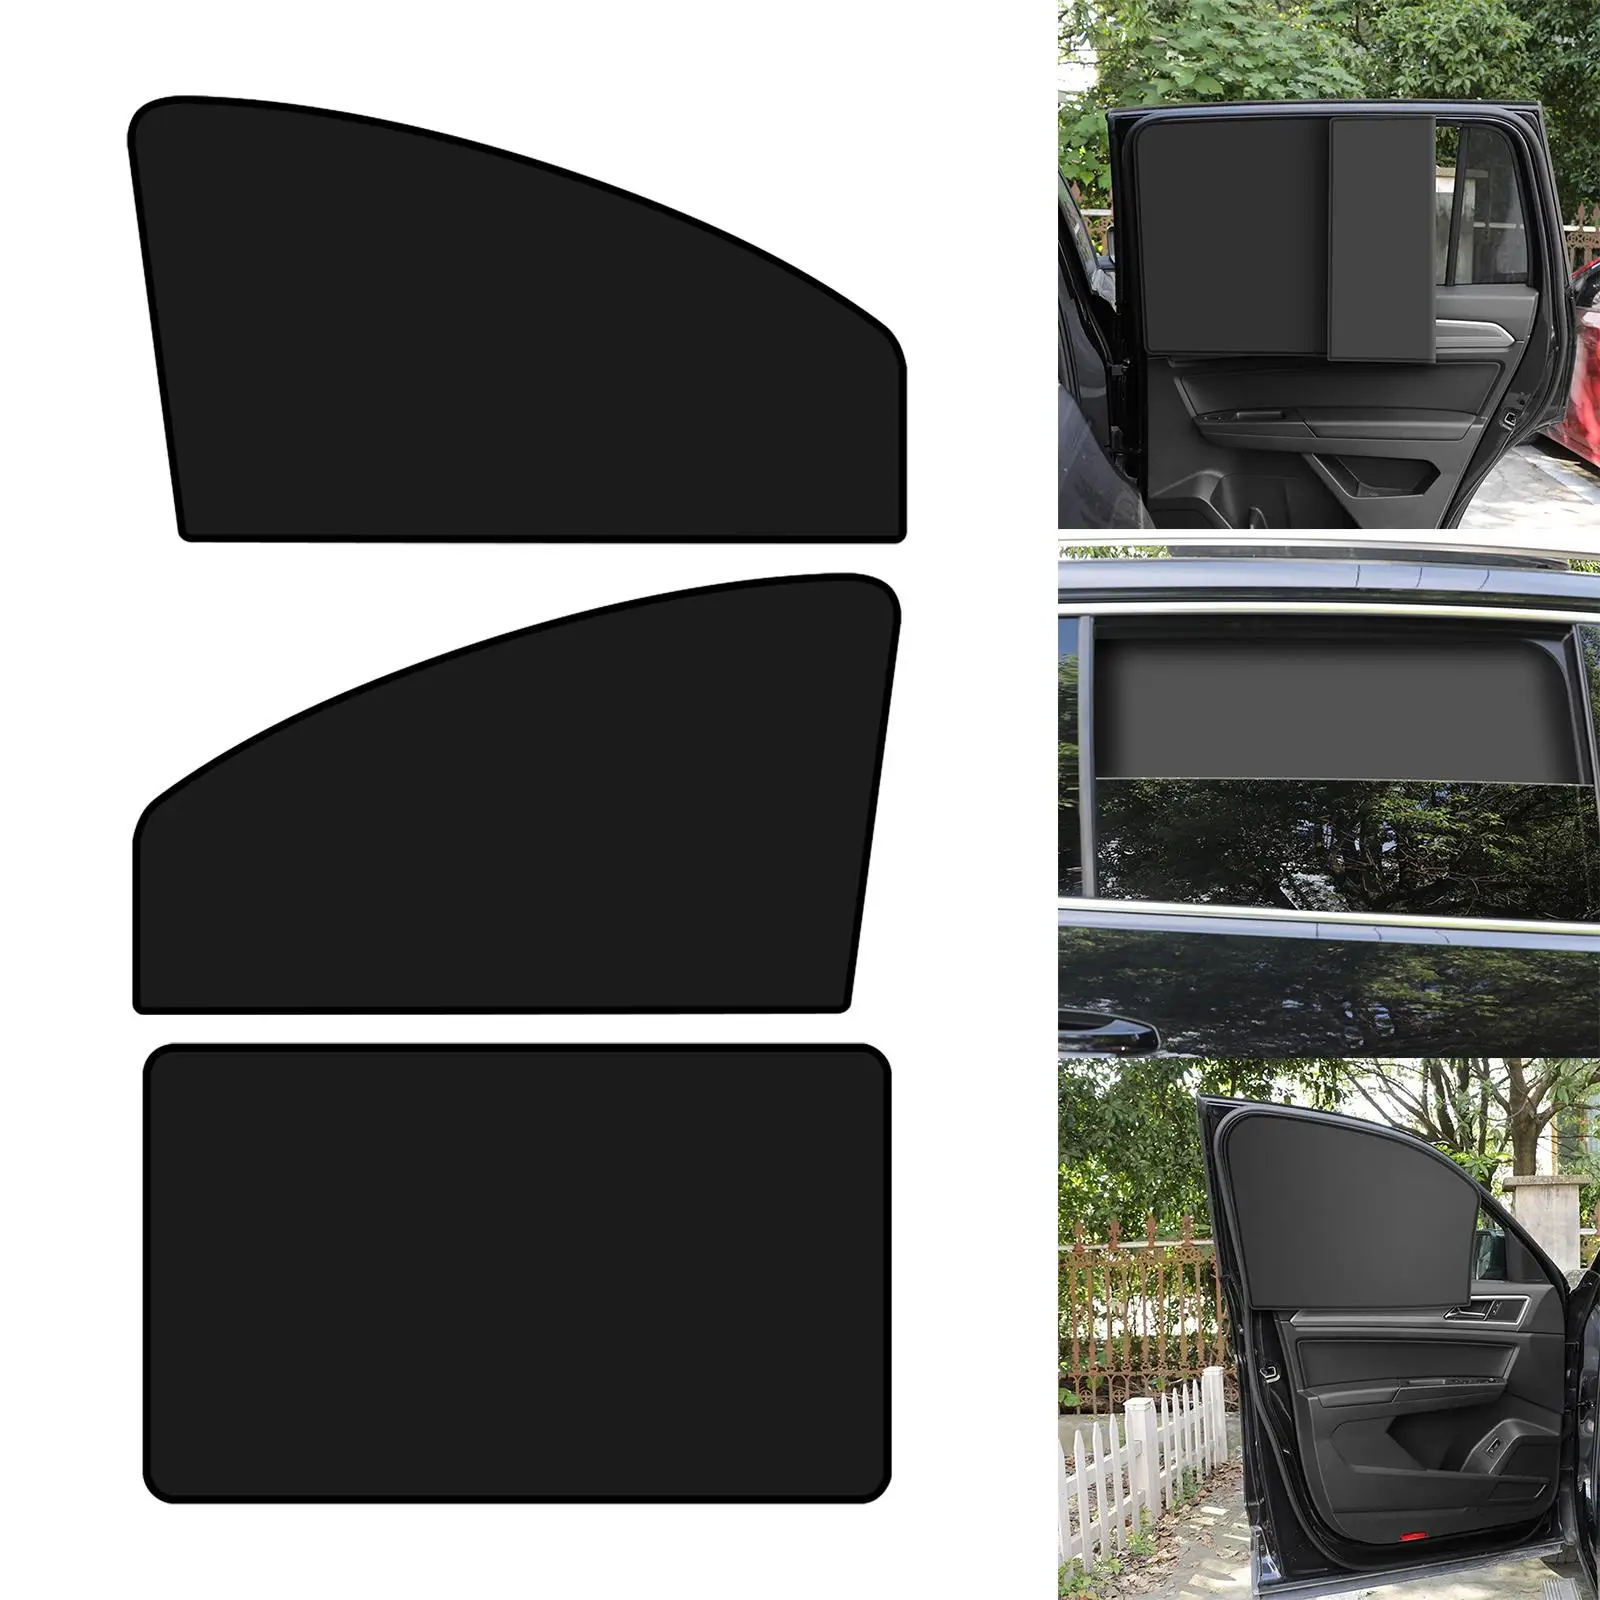 Magnetic Car Window Sunshade Blackout Automotive Curtain for Kids Baby